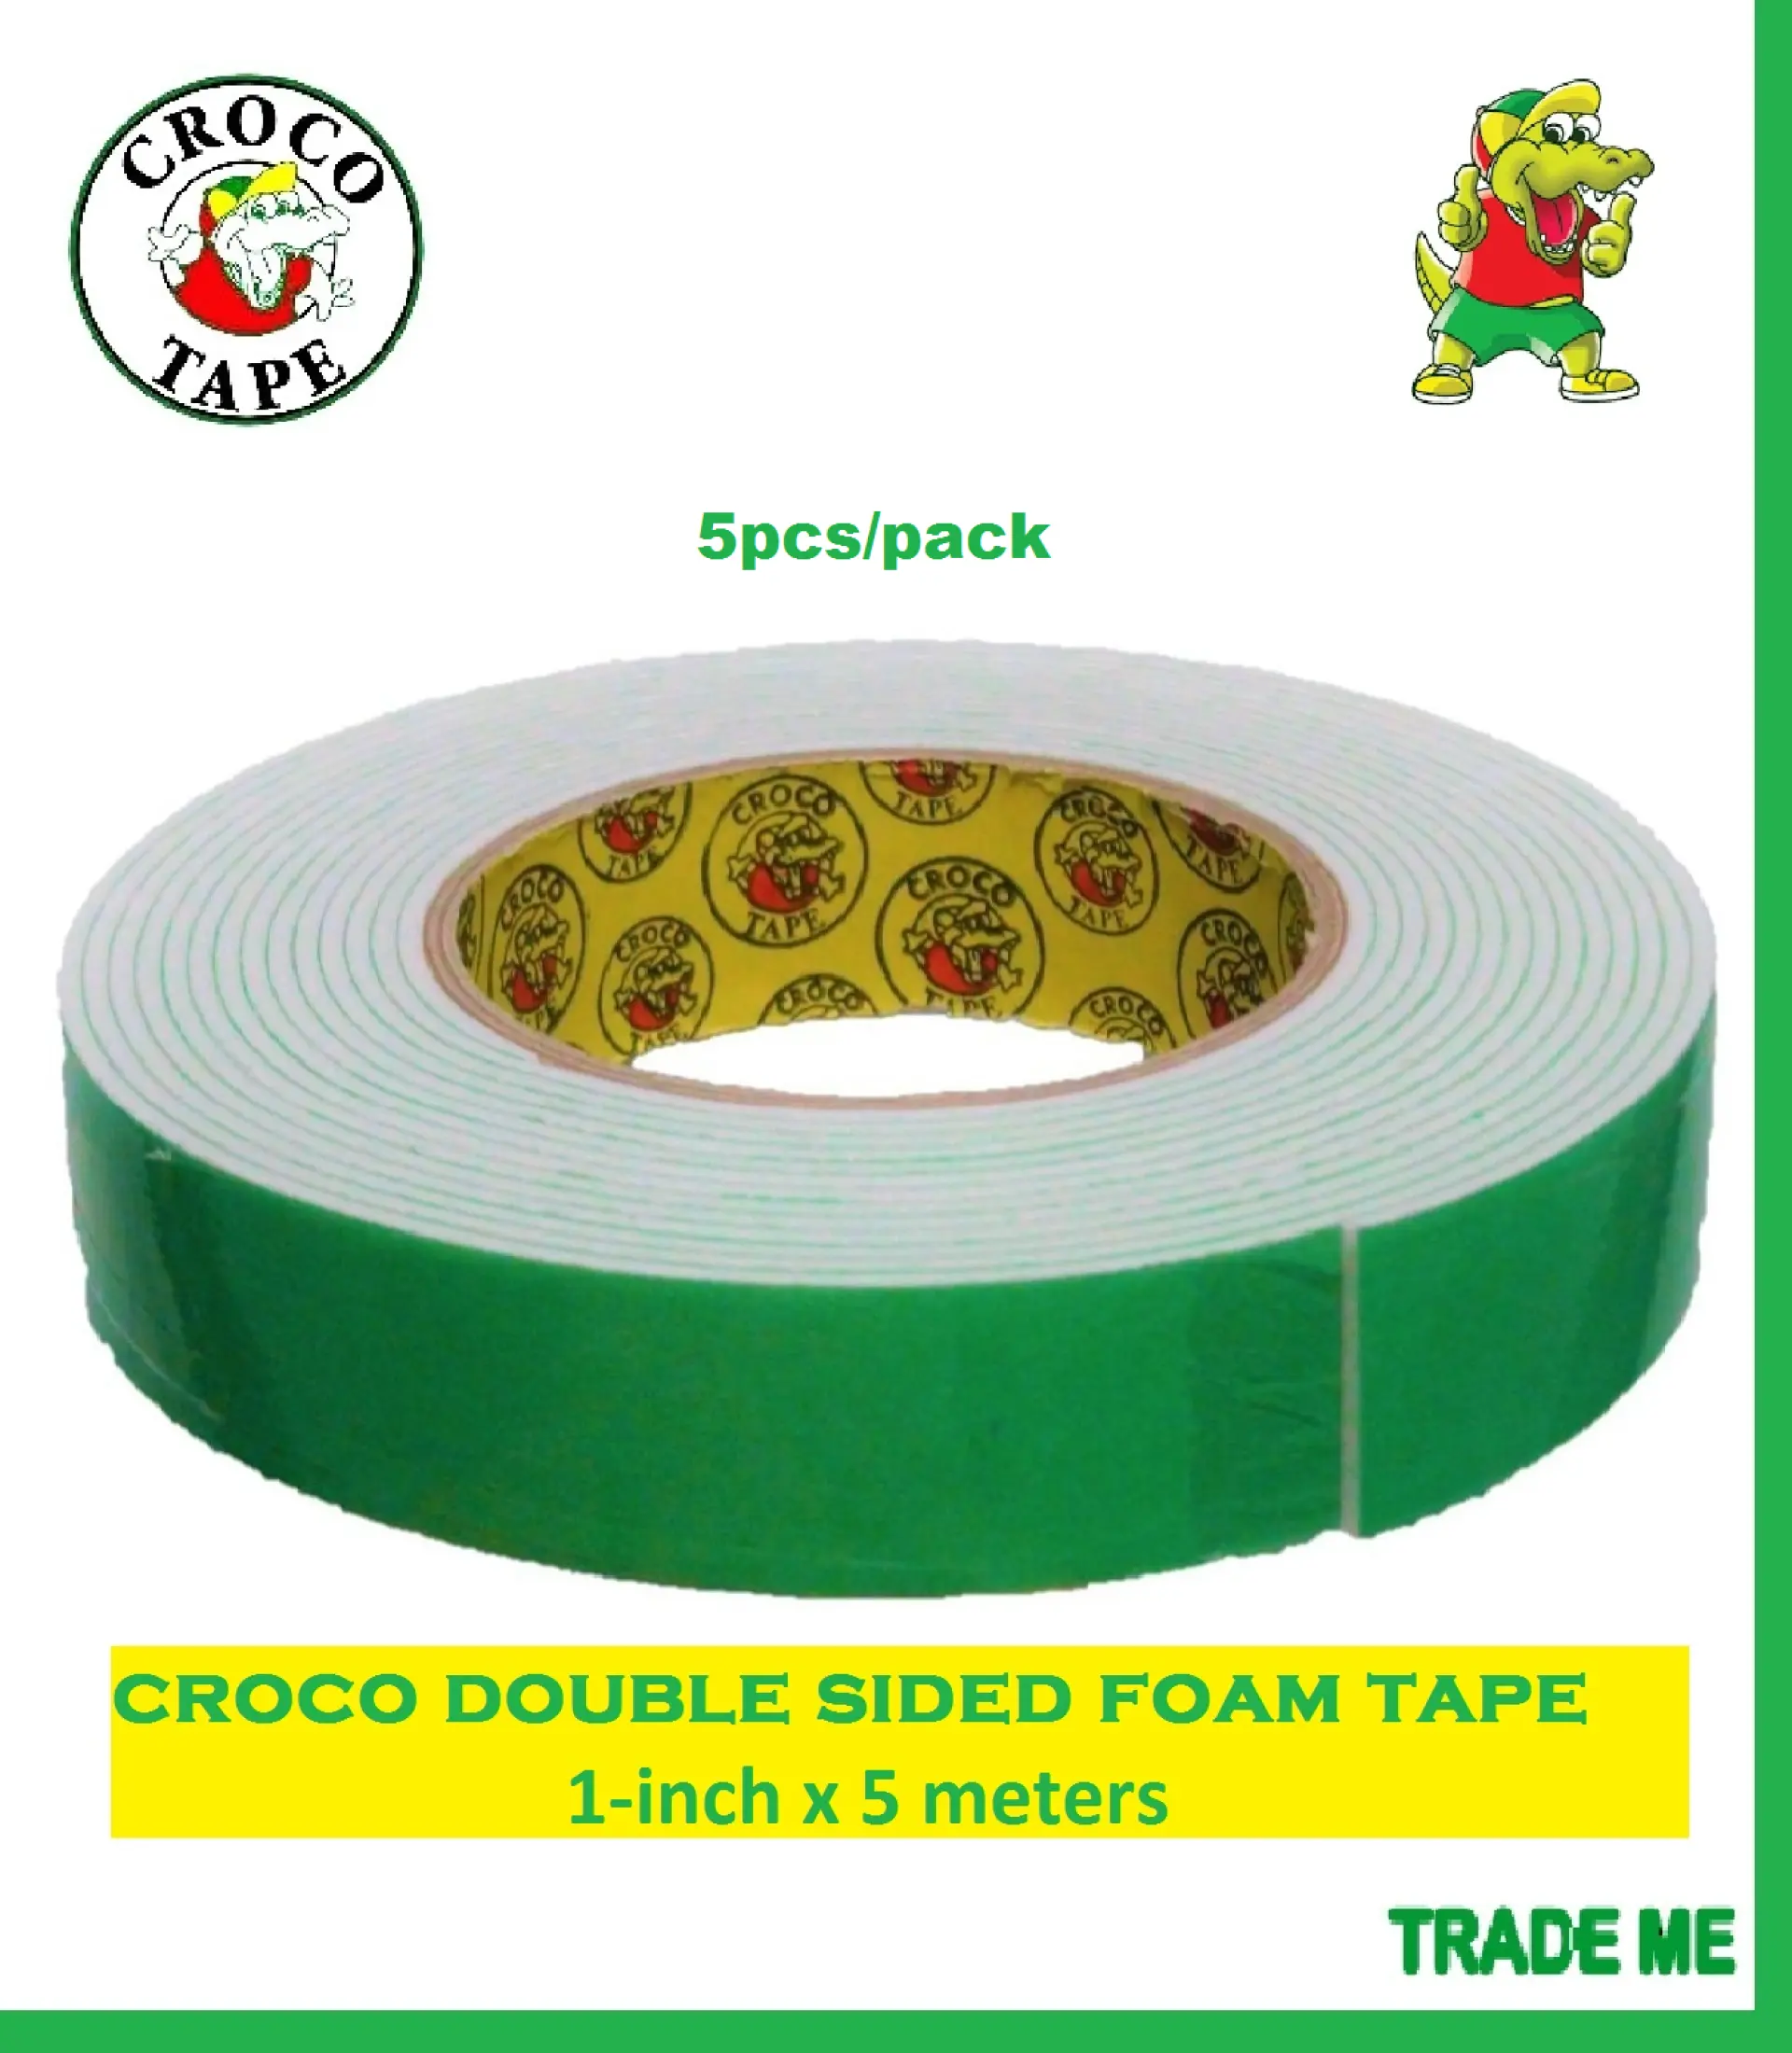 Crocodile Double Sided Tape Foam Type Brand X 5 Meters 1 Inch 5pcs Pack Lazada Ph